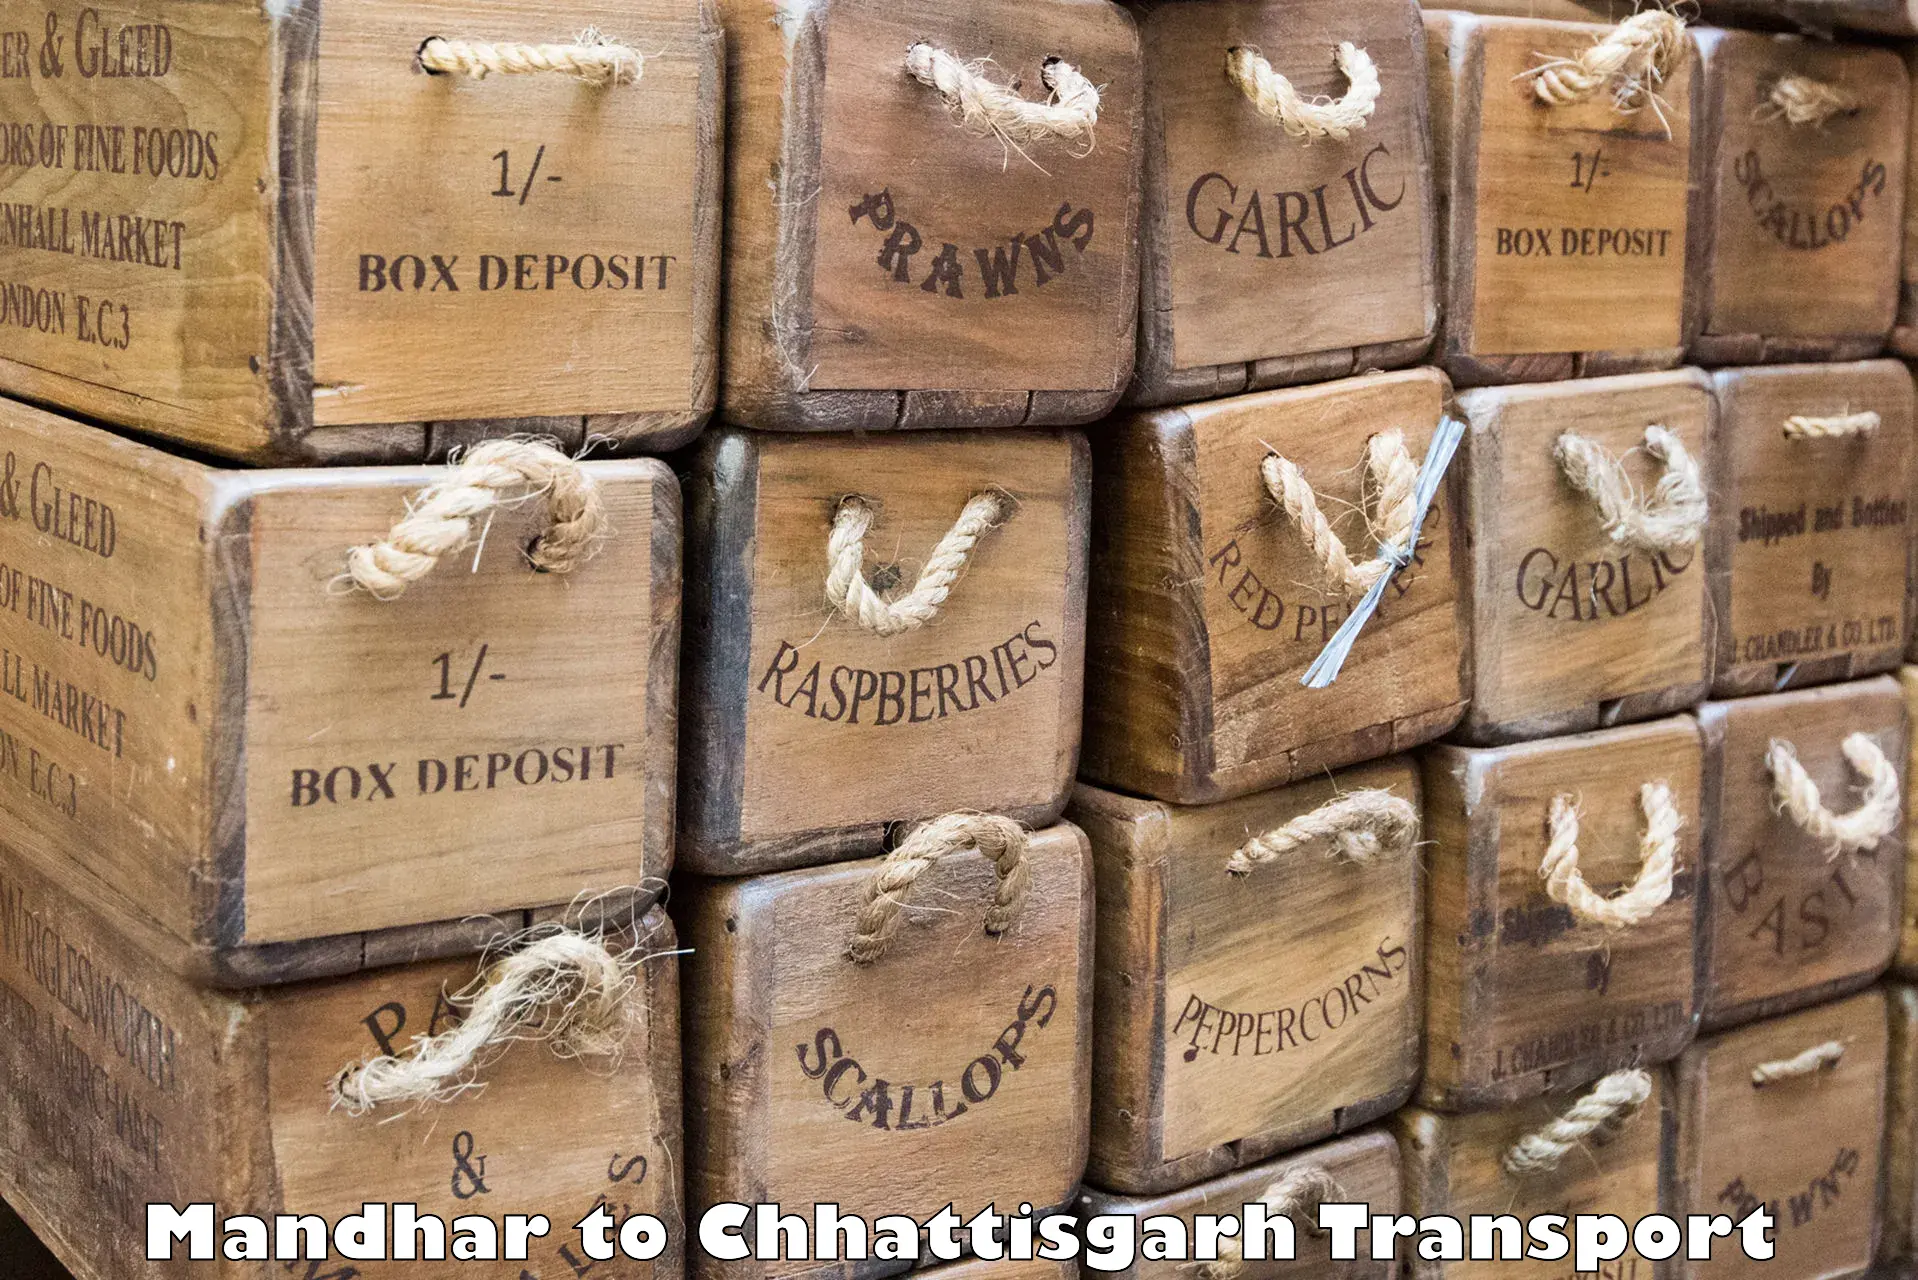 Container transport service Mandhar to Abhanpur